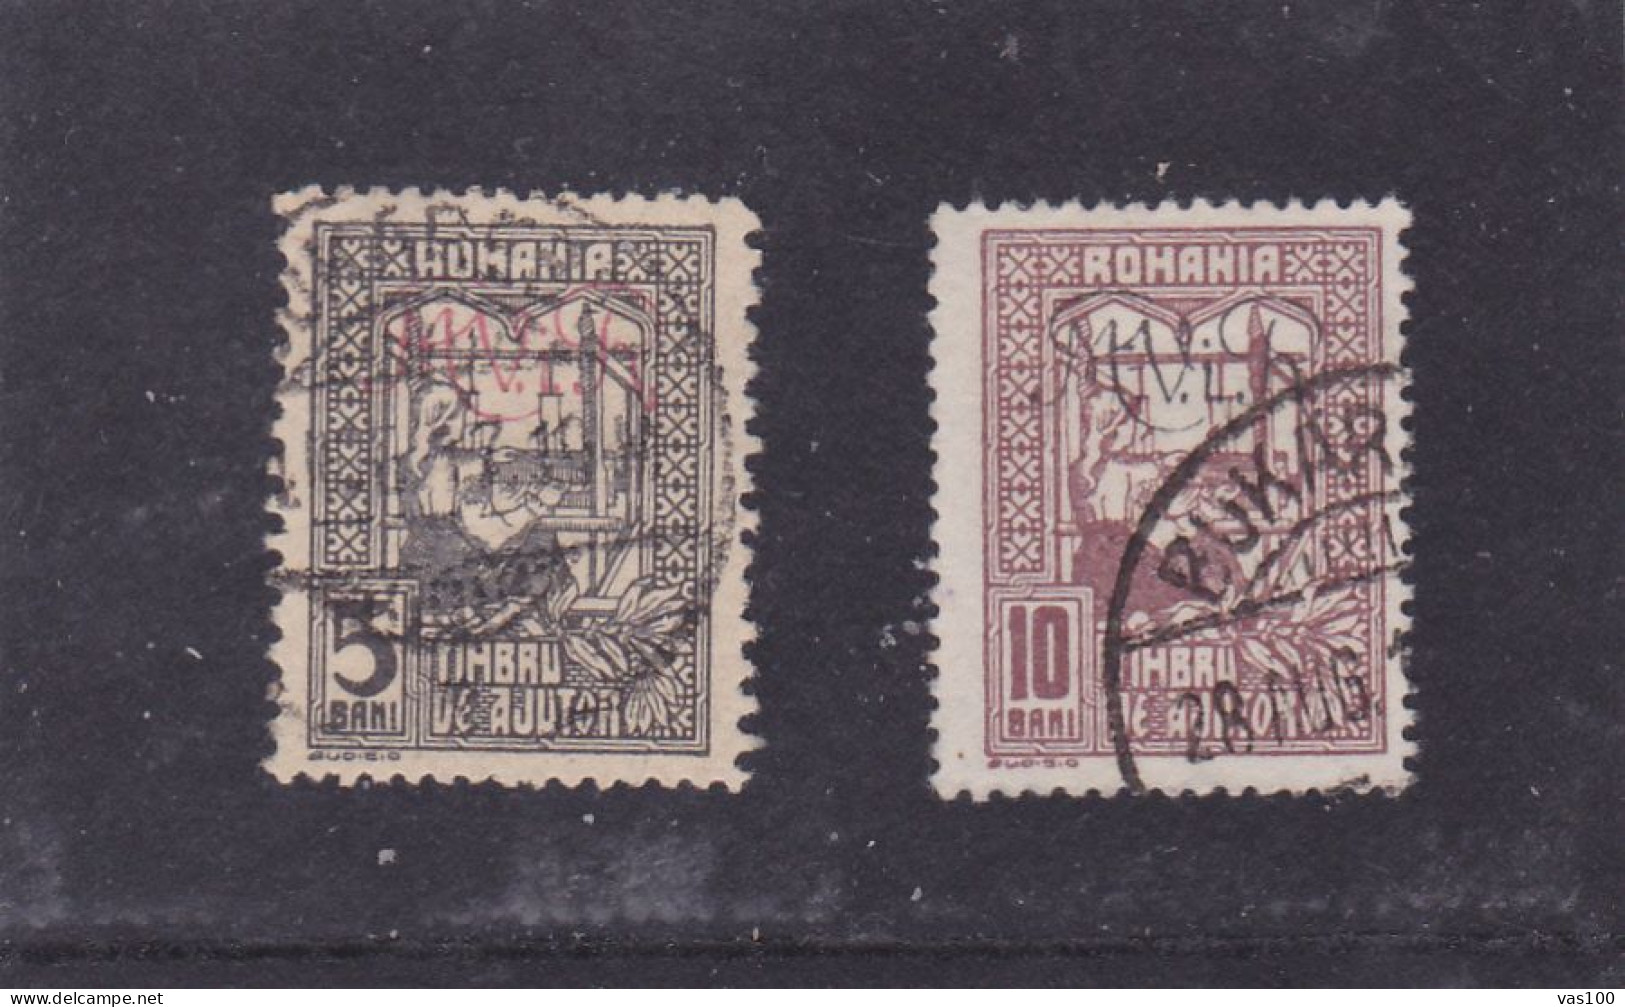 Germany WW1 Occupation In Romania 1917 MViR  2 STAMPS POSTAGE DUE USED - Foreign Occupations